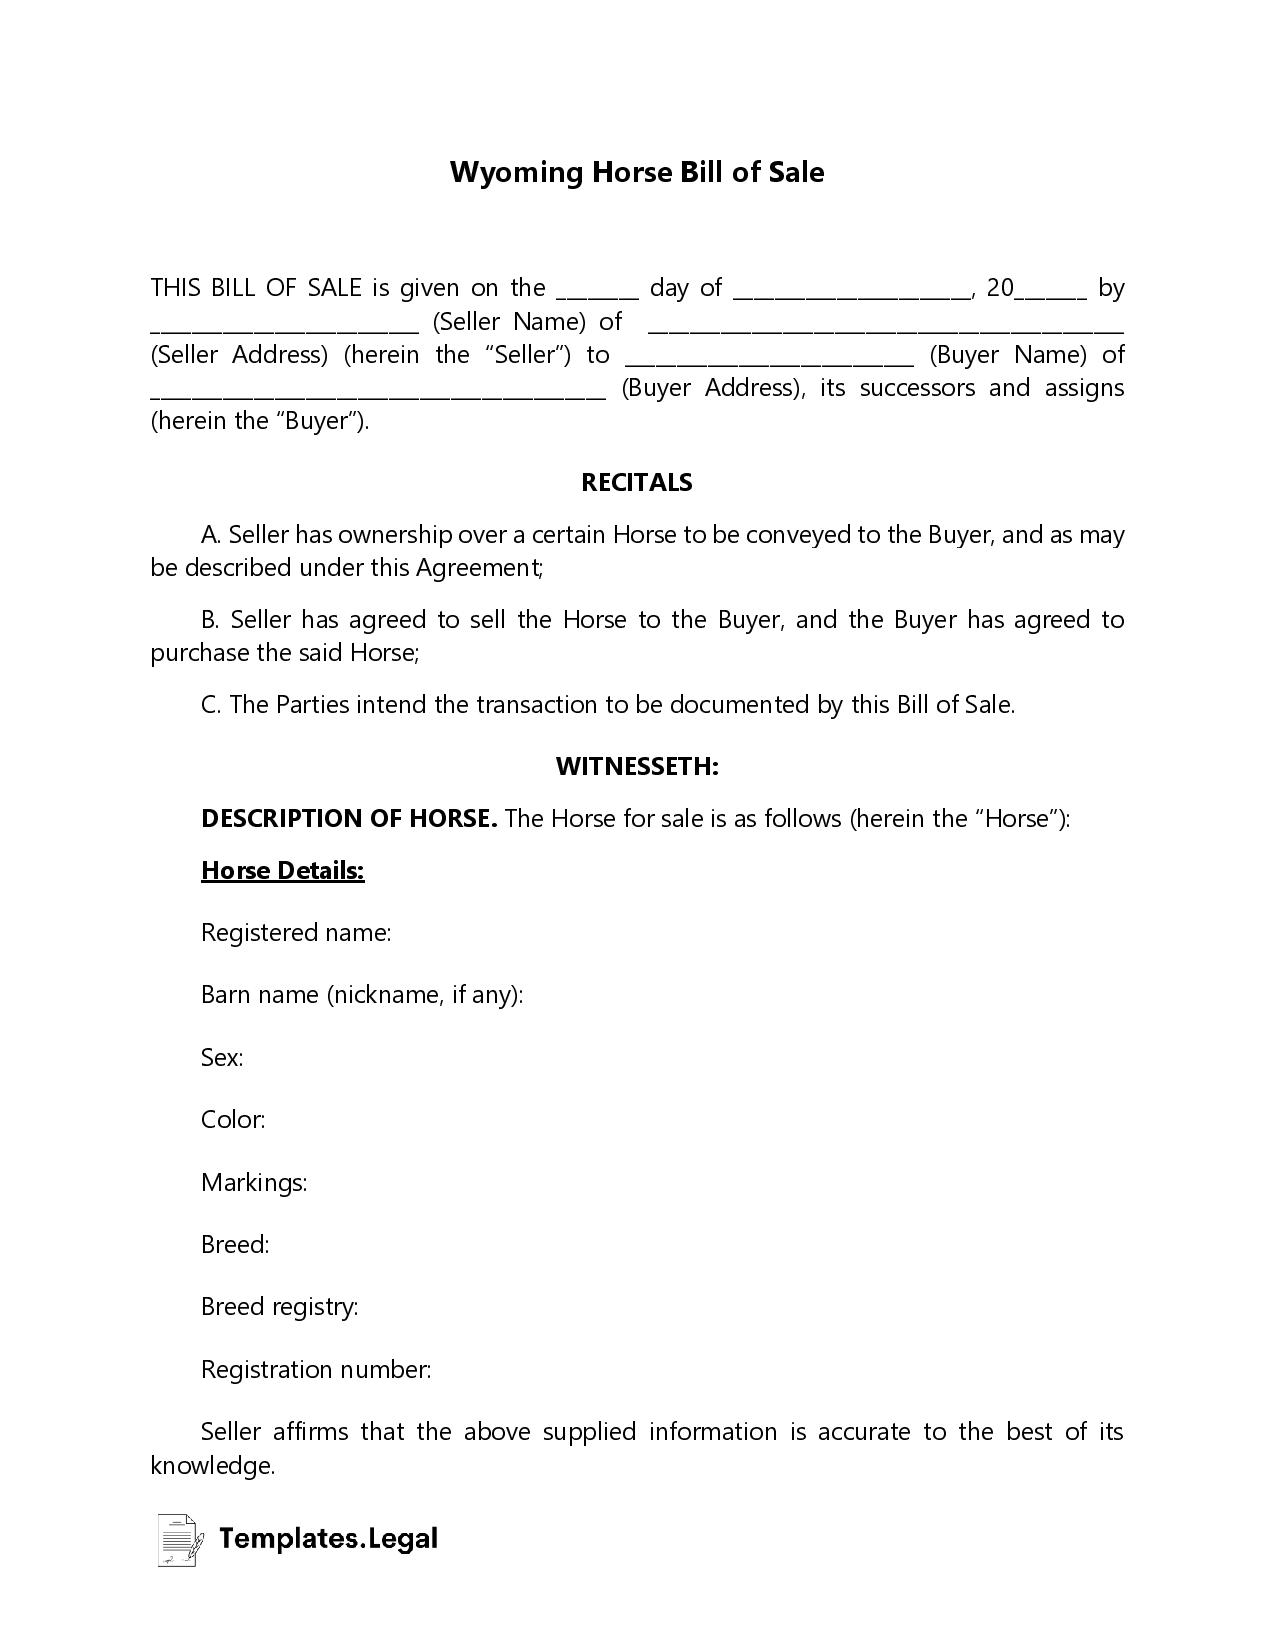 Wyoming Horse Bill of Sale - Templates.Legal